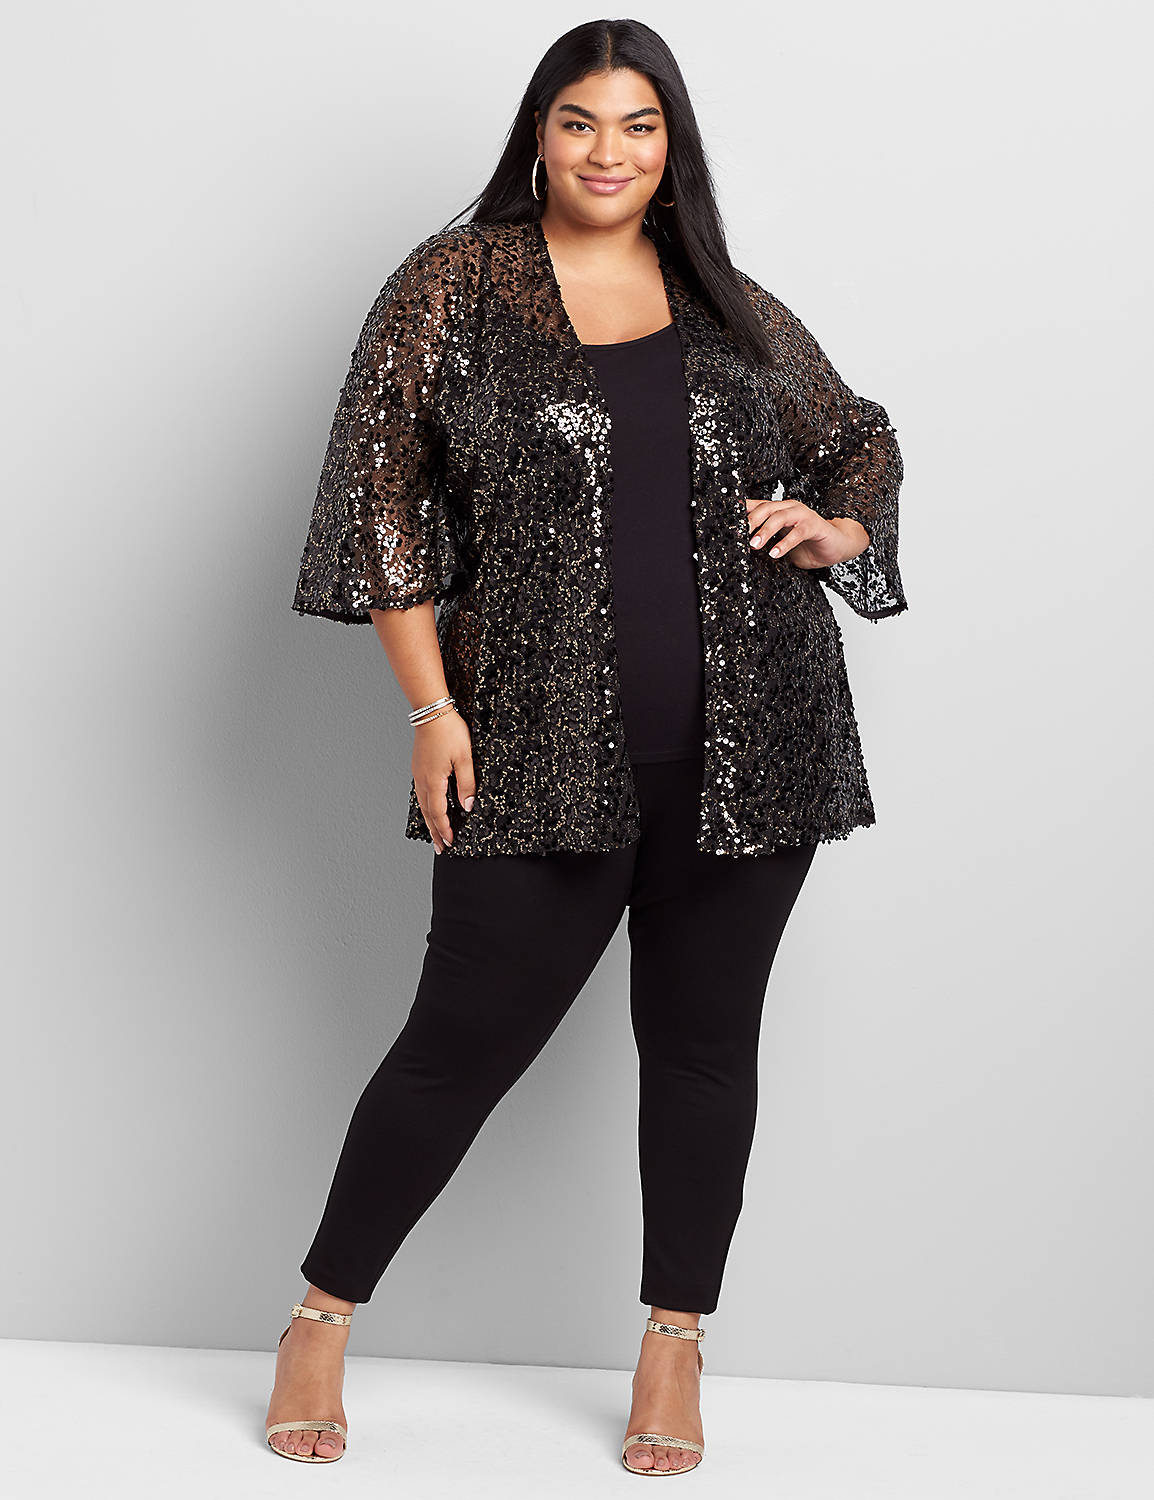 Outlet 3/4 Sleeve Sequin Kimono Over Piece 1117391:Silver W/BlackSequins- As Hanger:10/12 Product Image 3